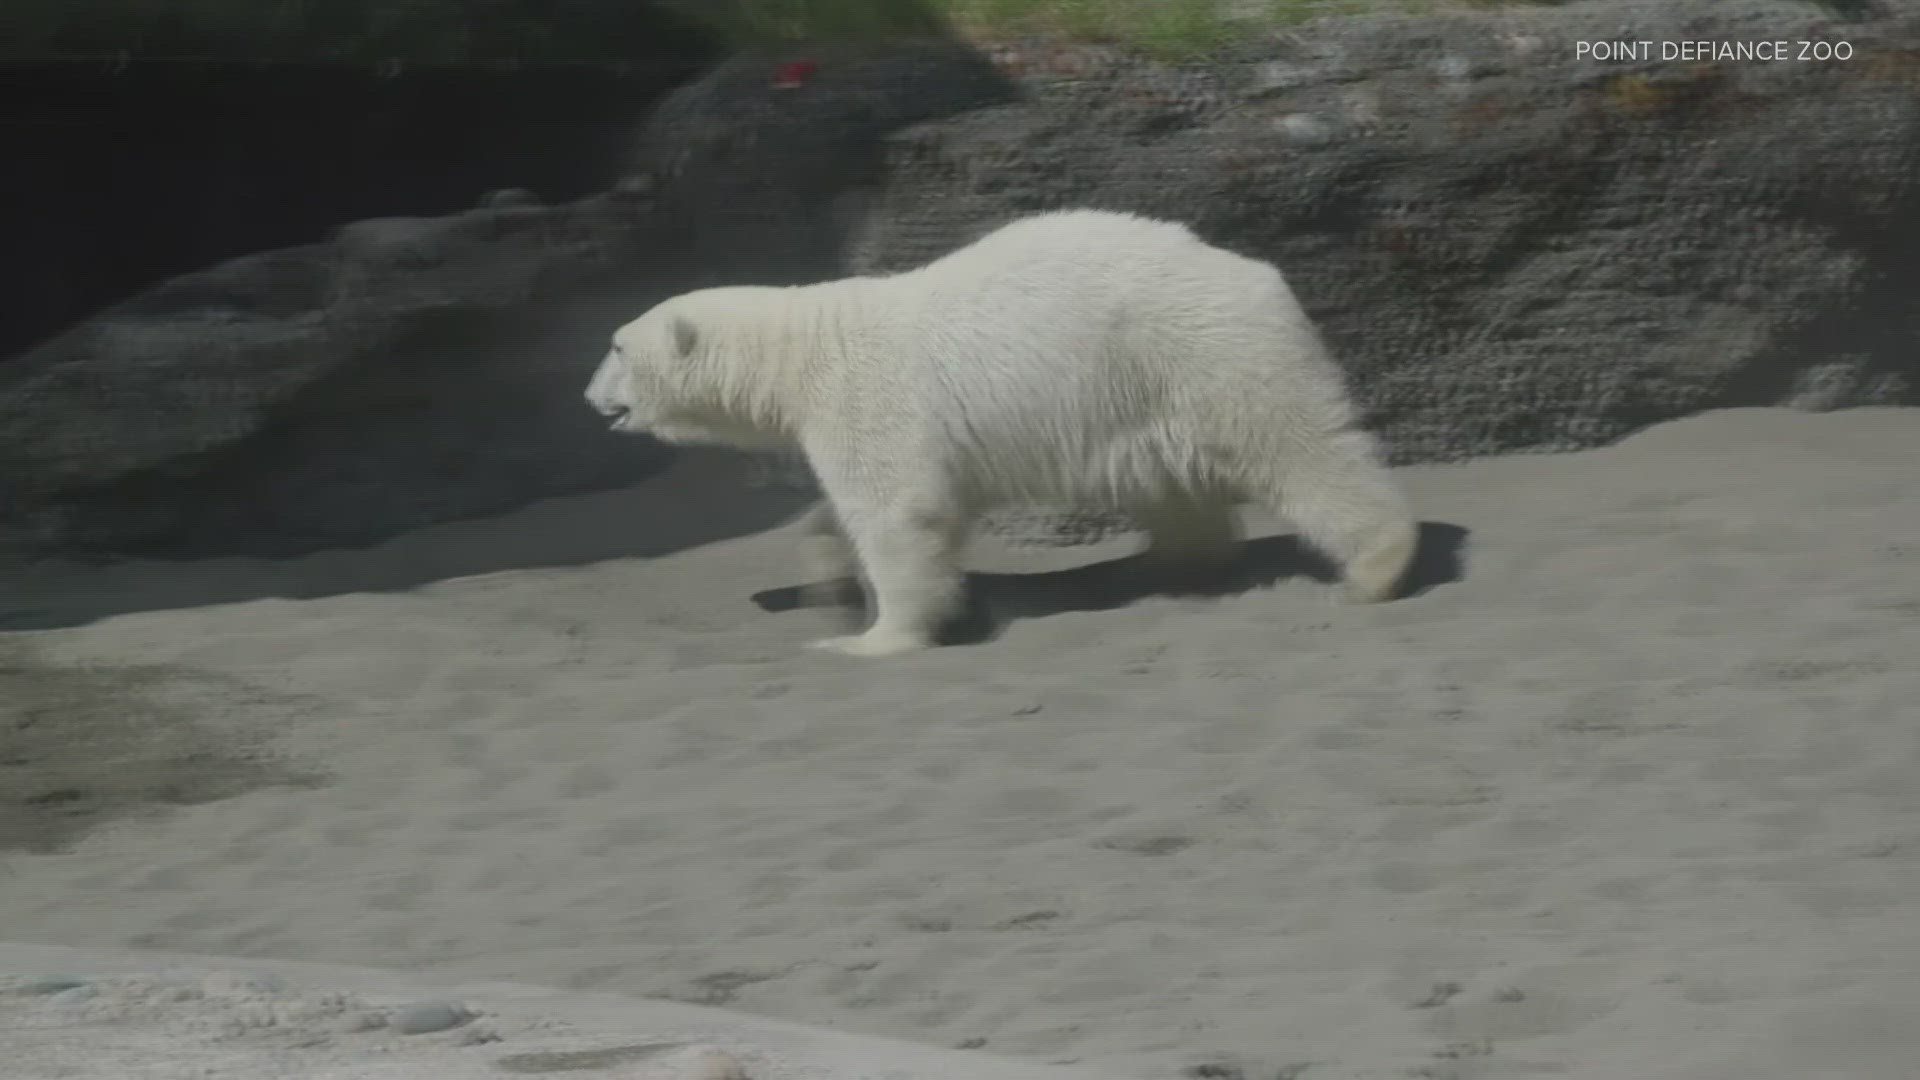 The twin polar bear cubs, Astra and Laerke, will make their public debut on June 15.